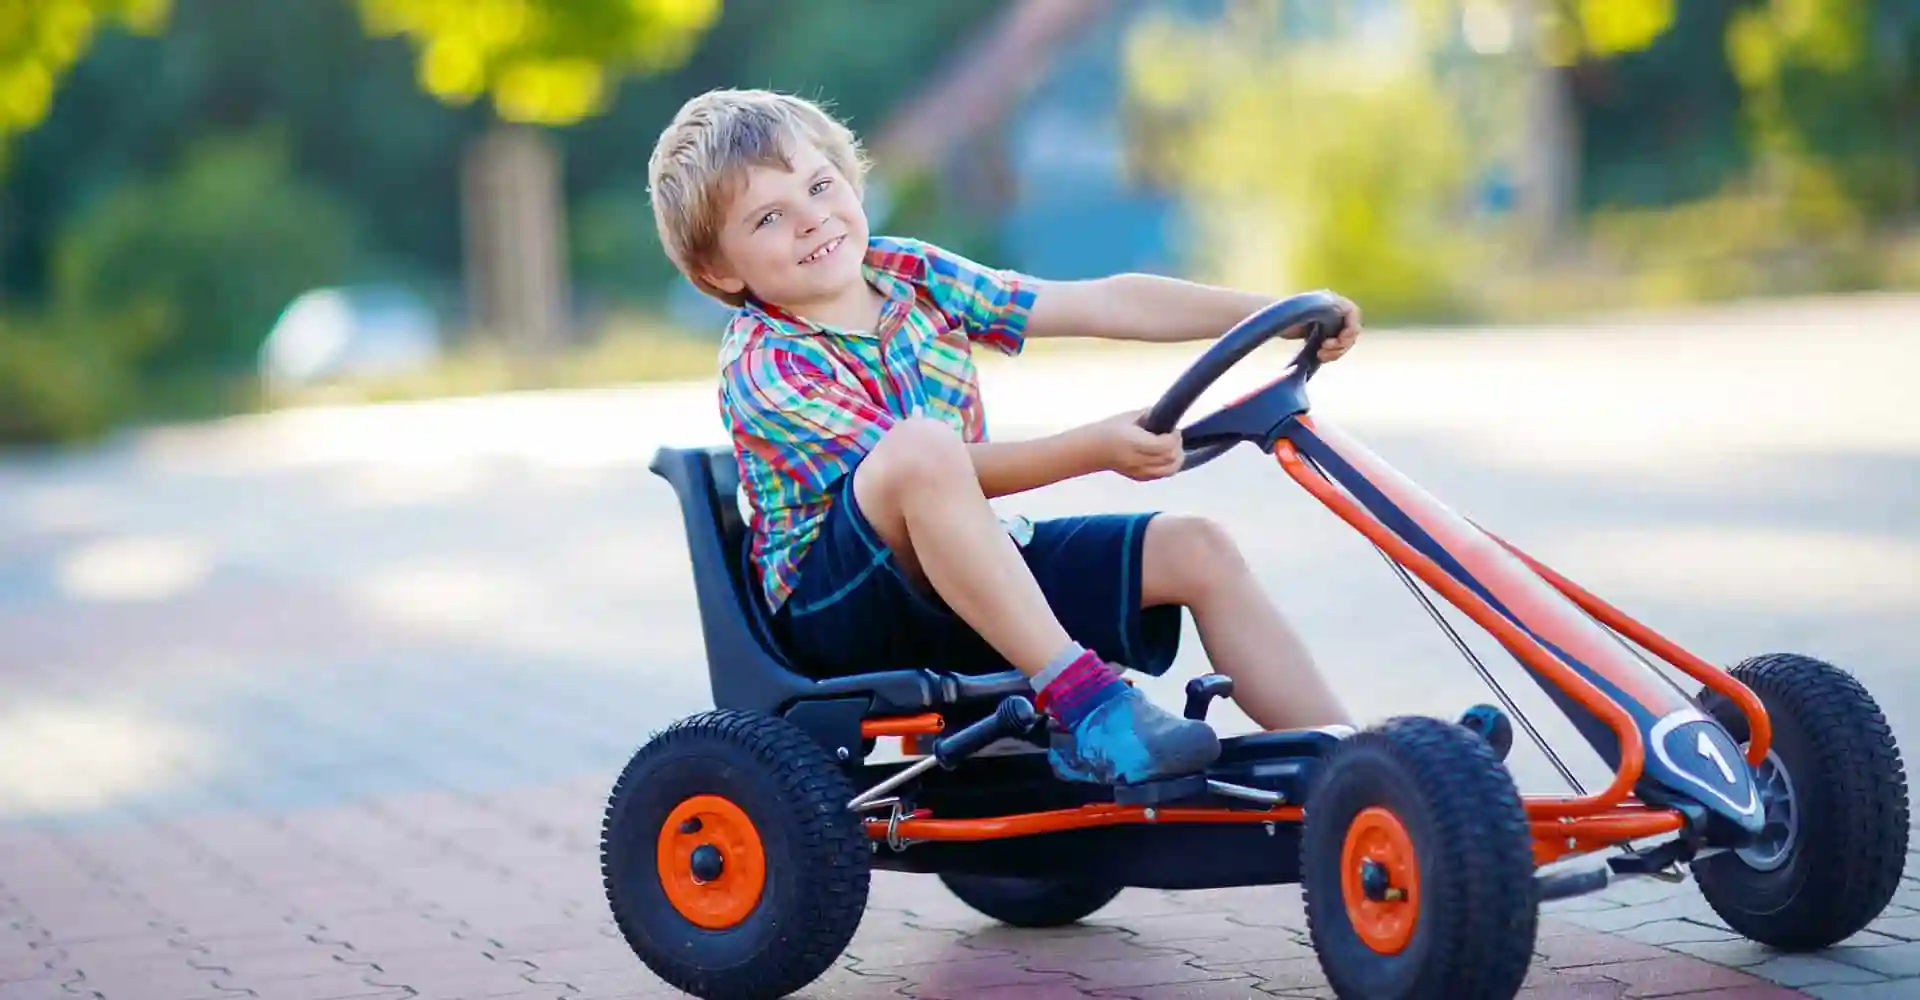 Berg Go-Karts Review - Why Berg Karts Are So Popular With Kids